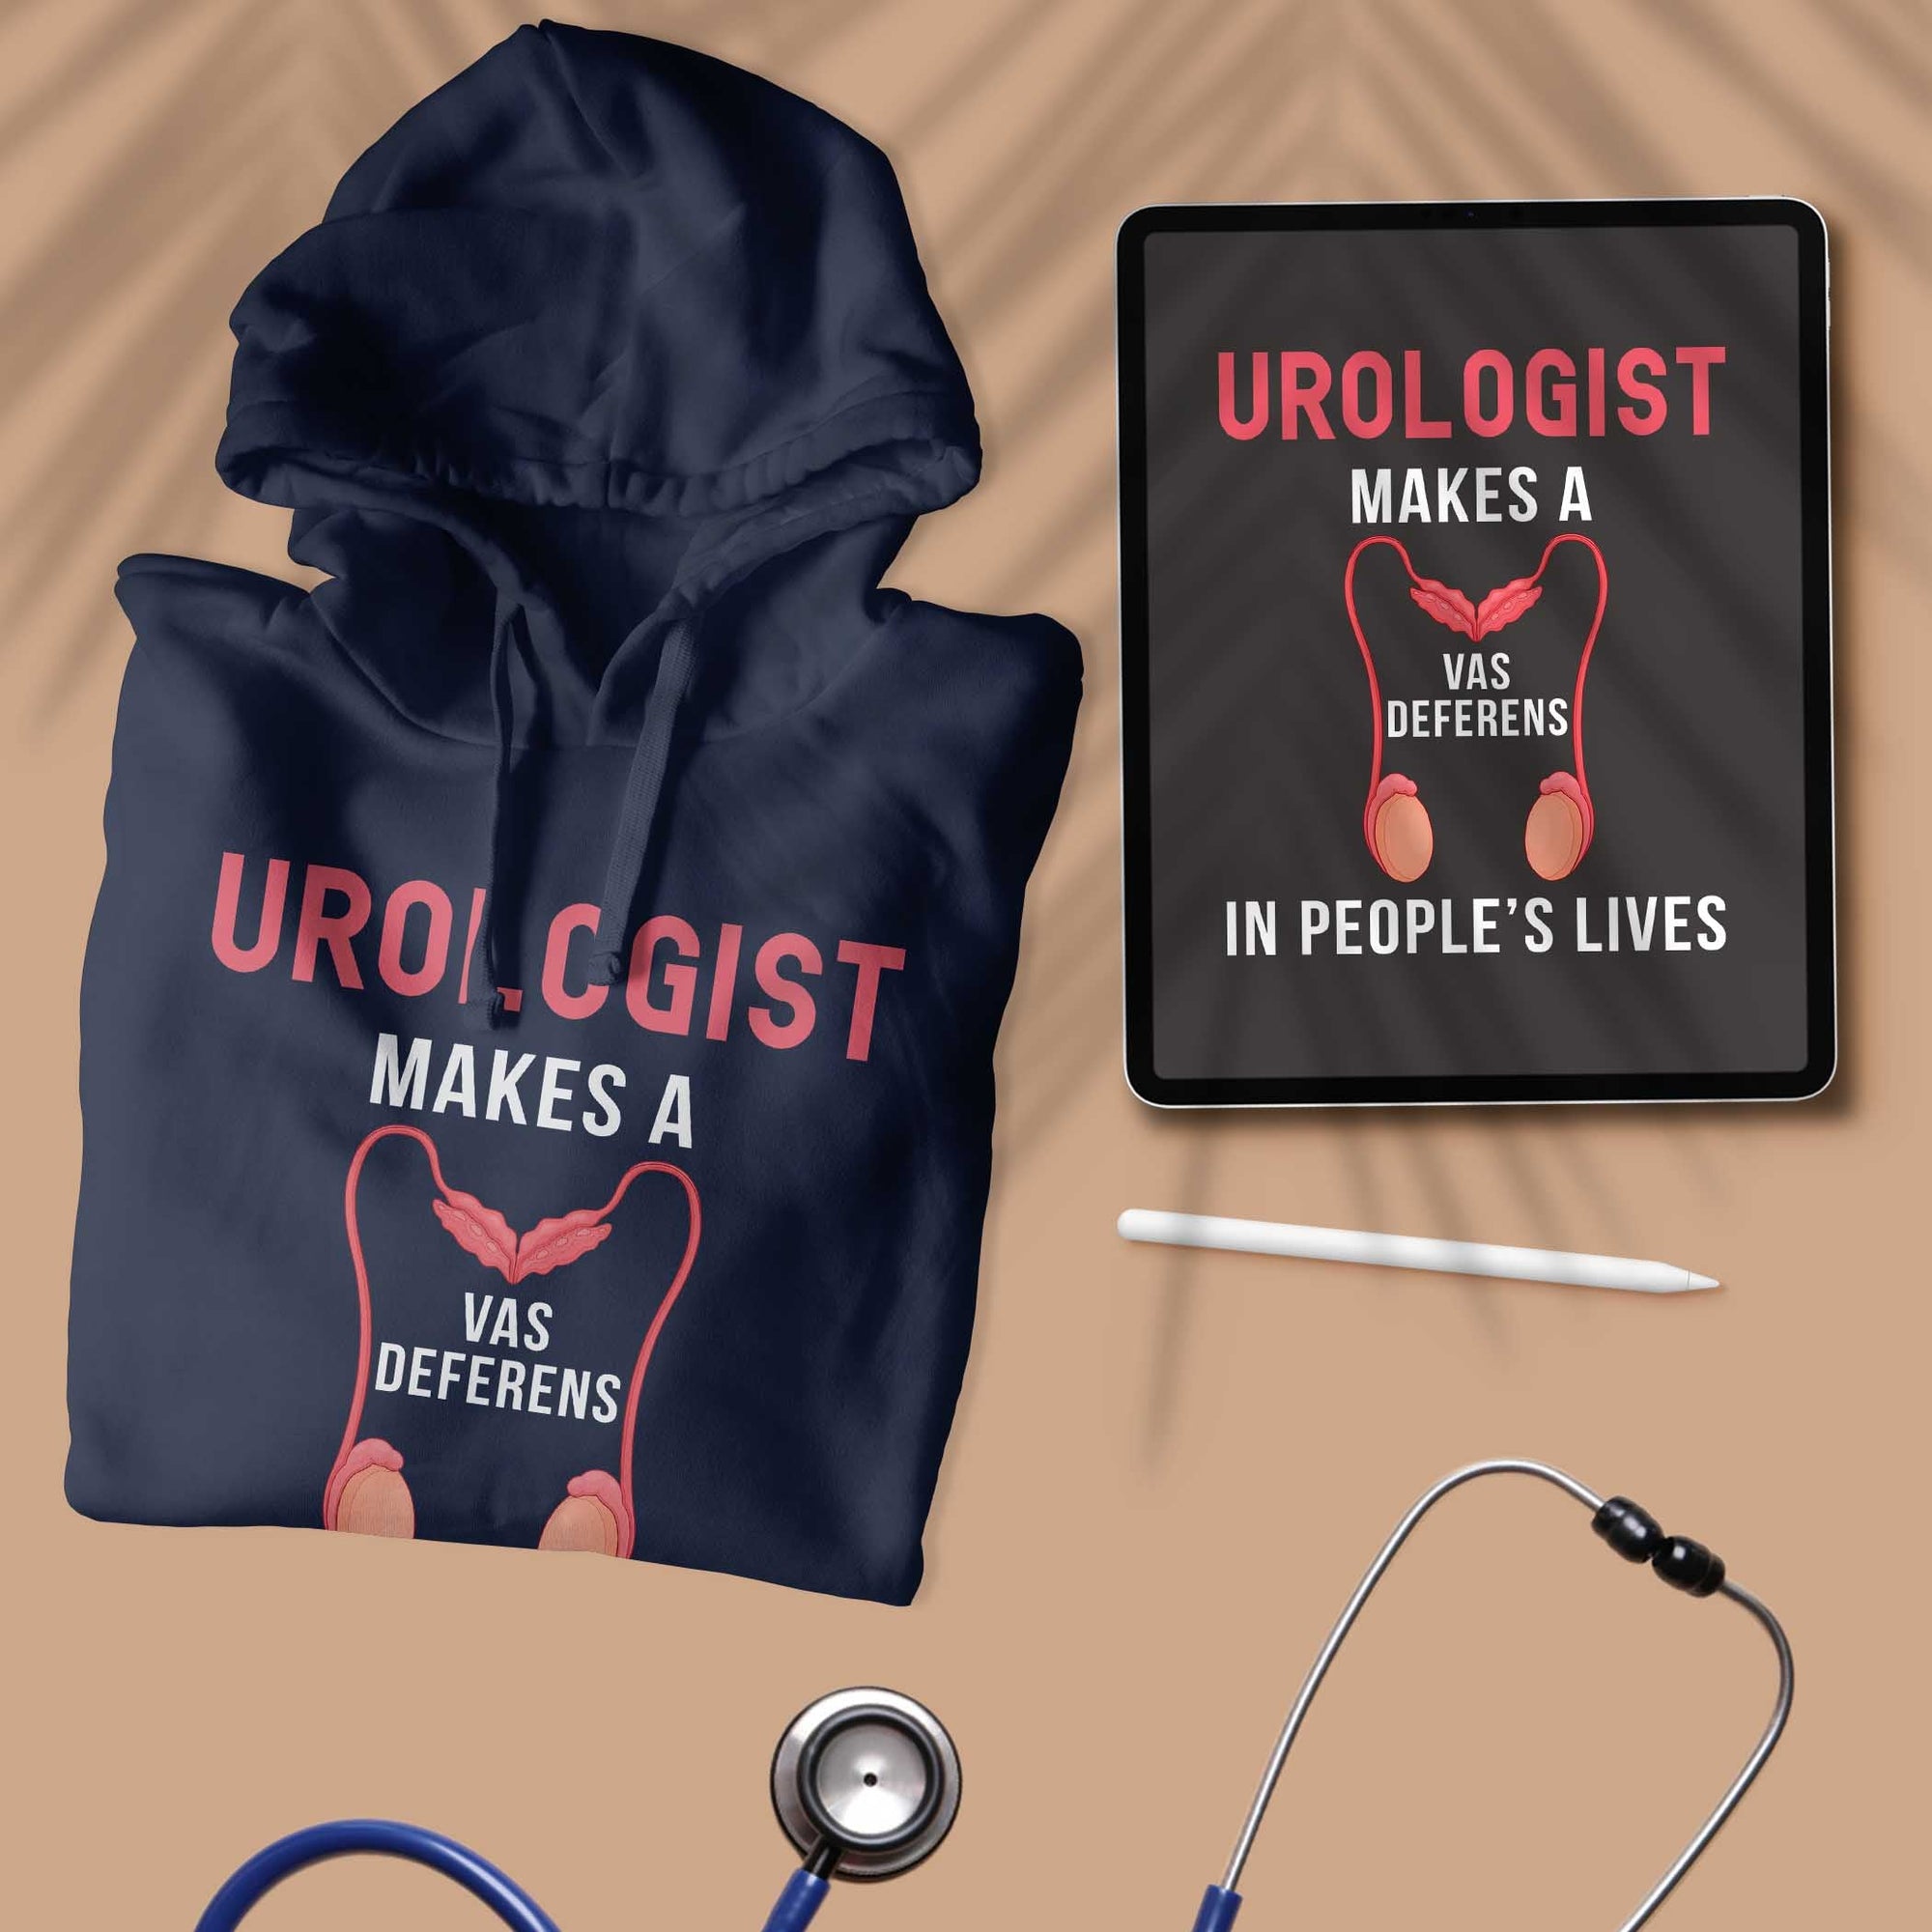 Urologist Makes A Vast Difference - Unisex Hoodie